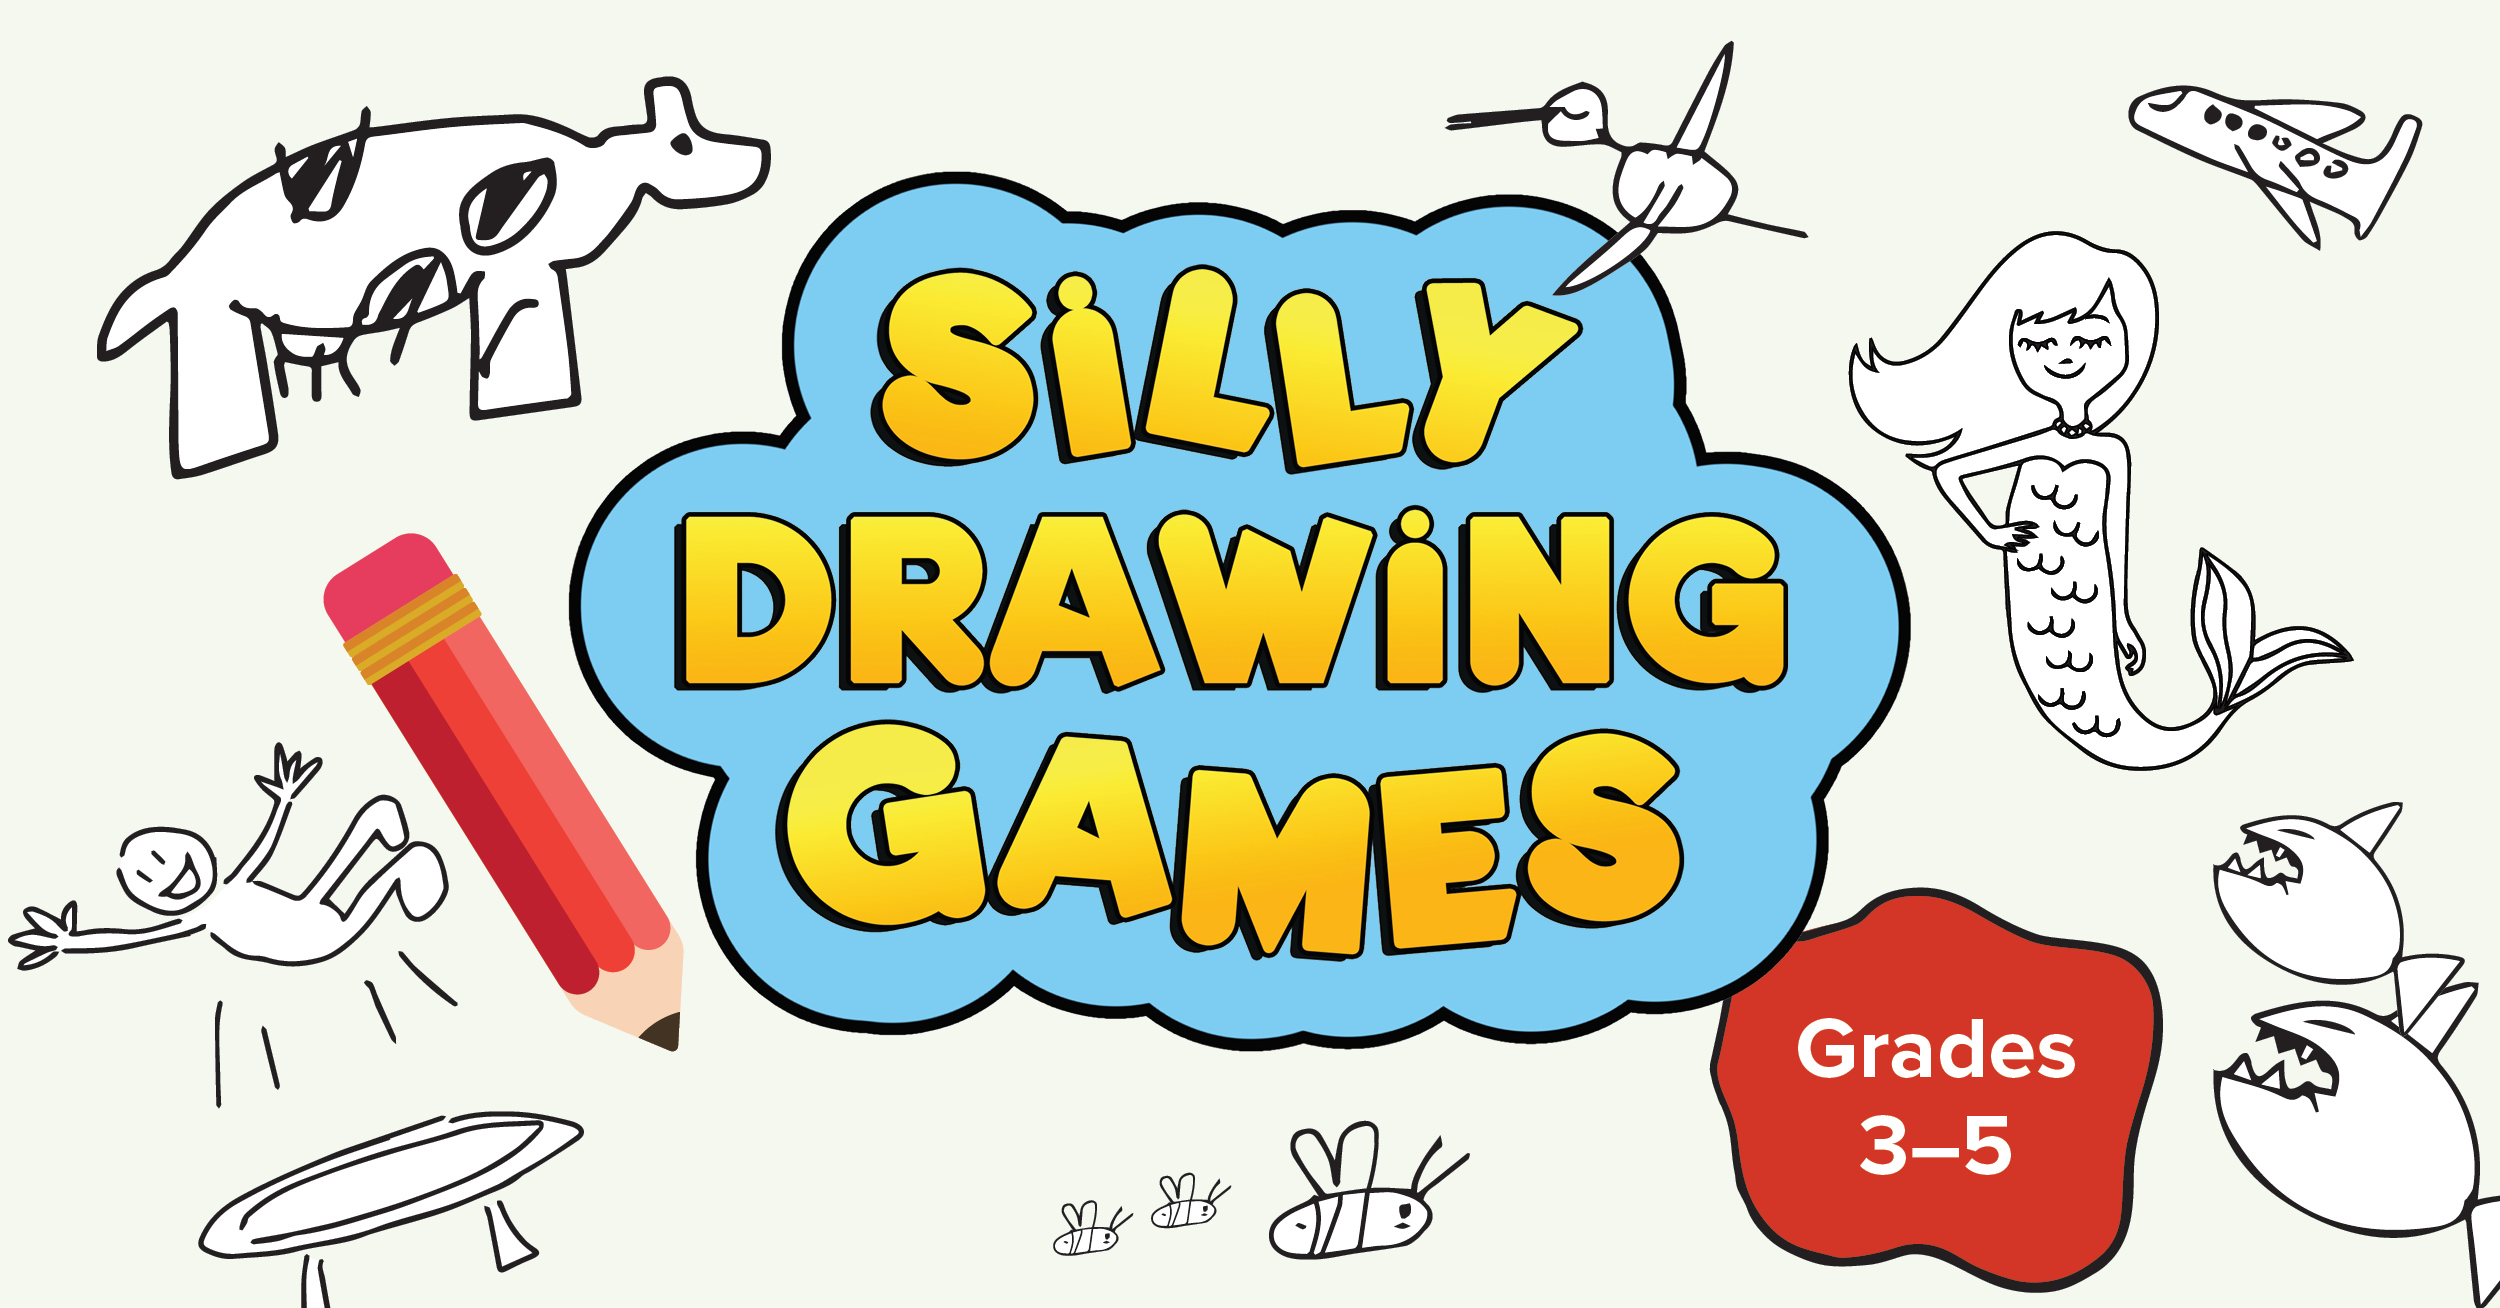 The words Silly Drawing Games in a cloud, with Grades 3-5 in a second cloud, surrounded by pencil-drawn sketches